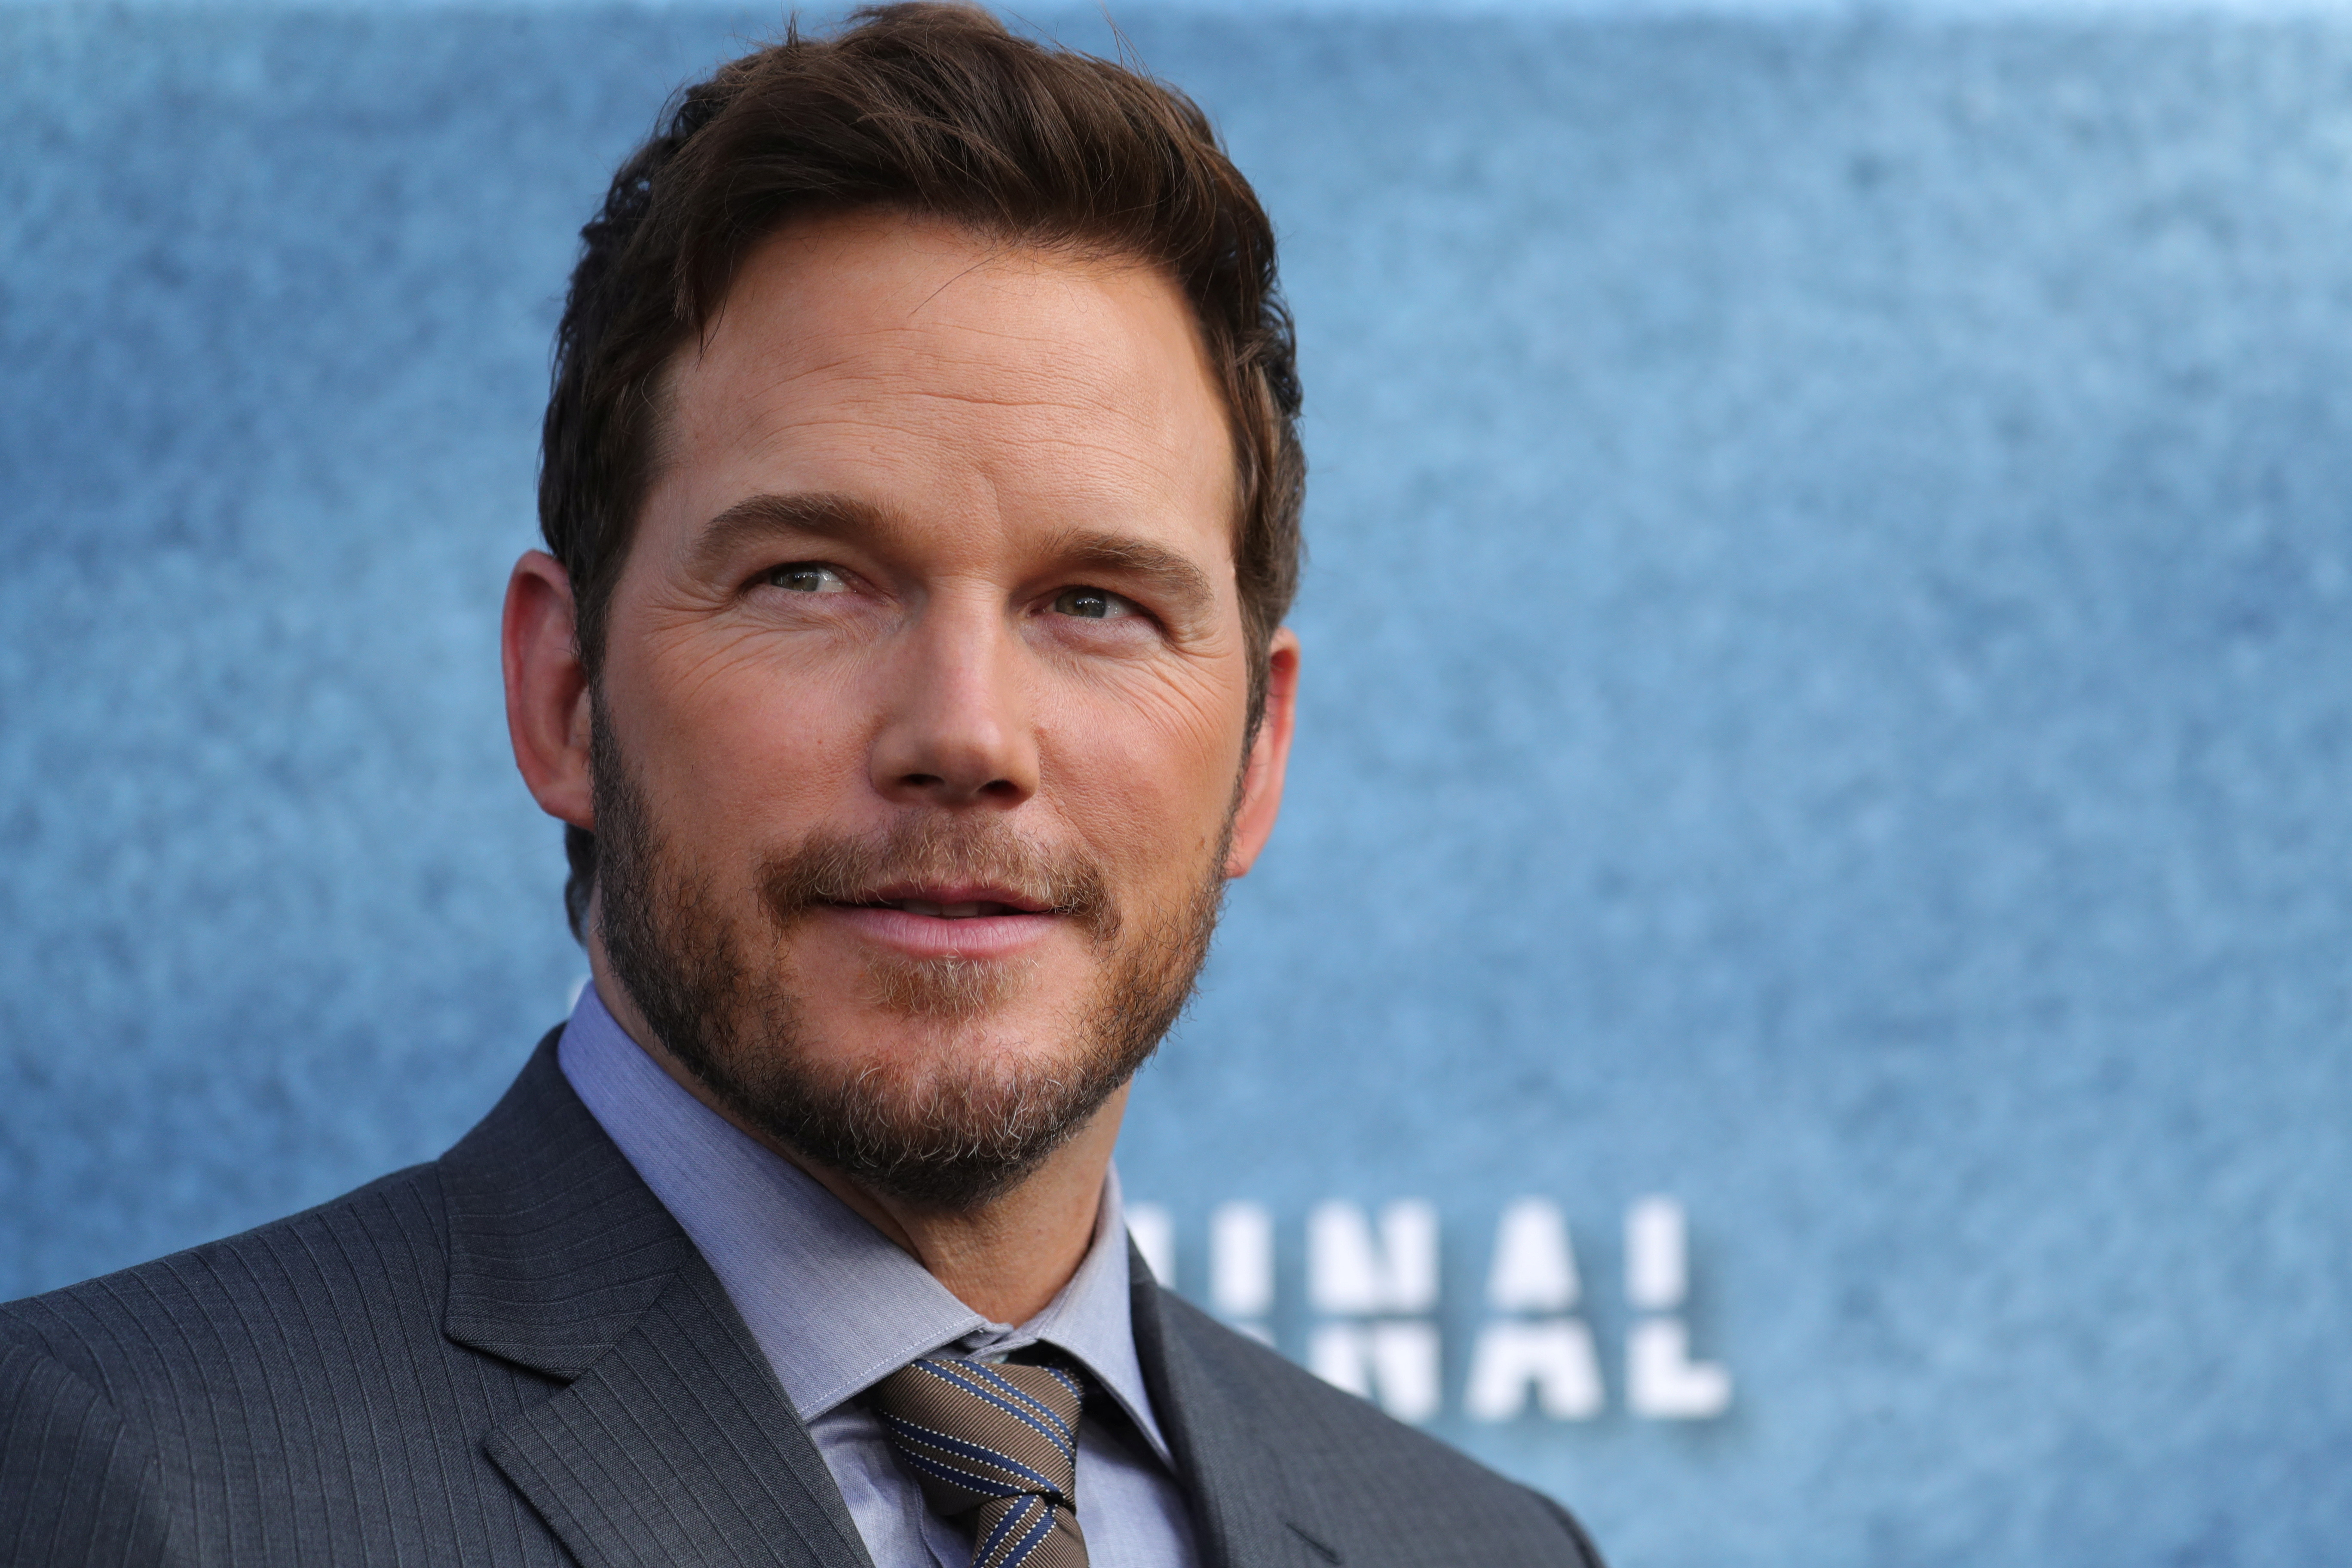 Chris Pratt would also be part of the cast of the new film.  (REUTERS/David Swanson)